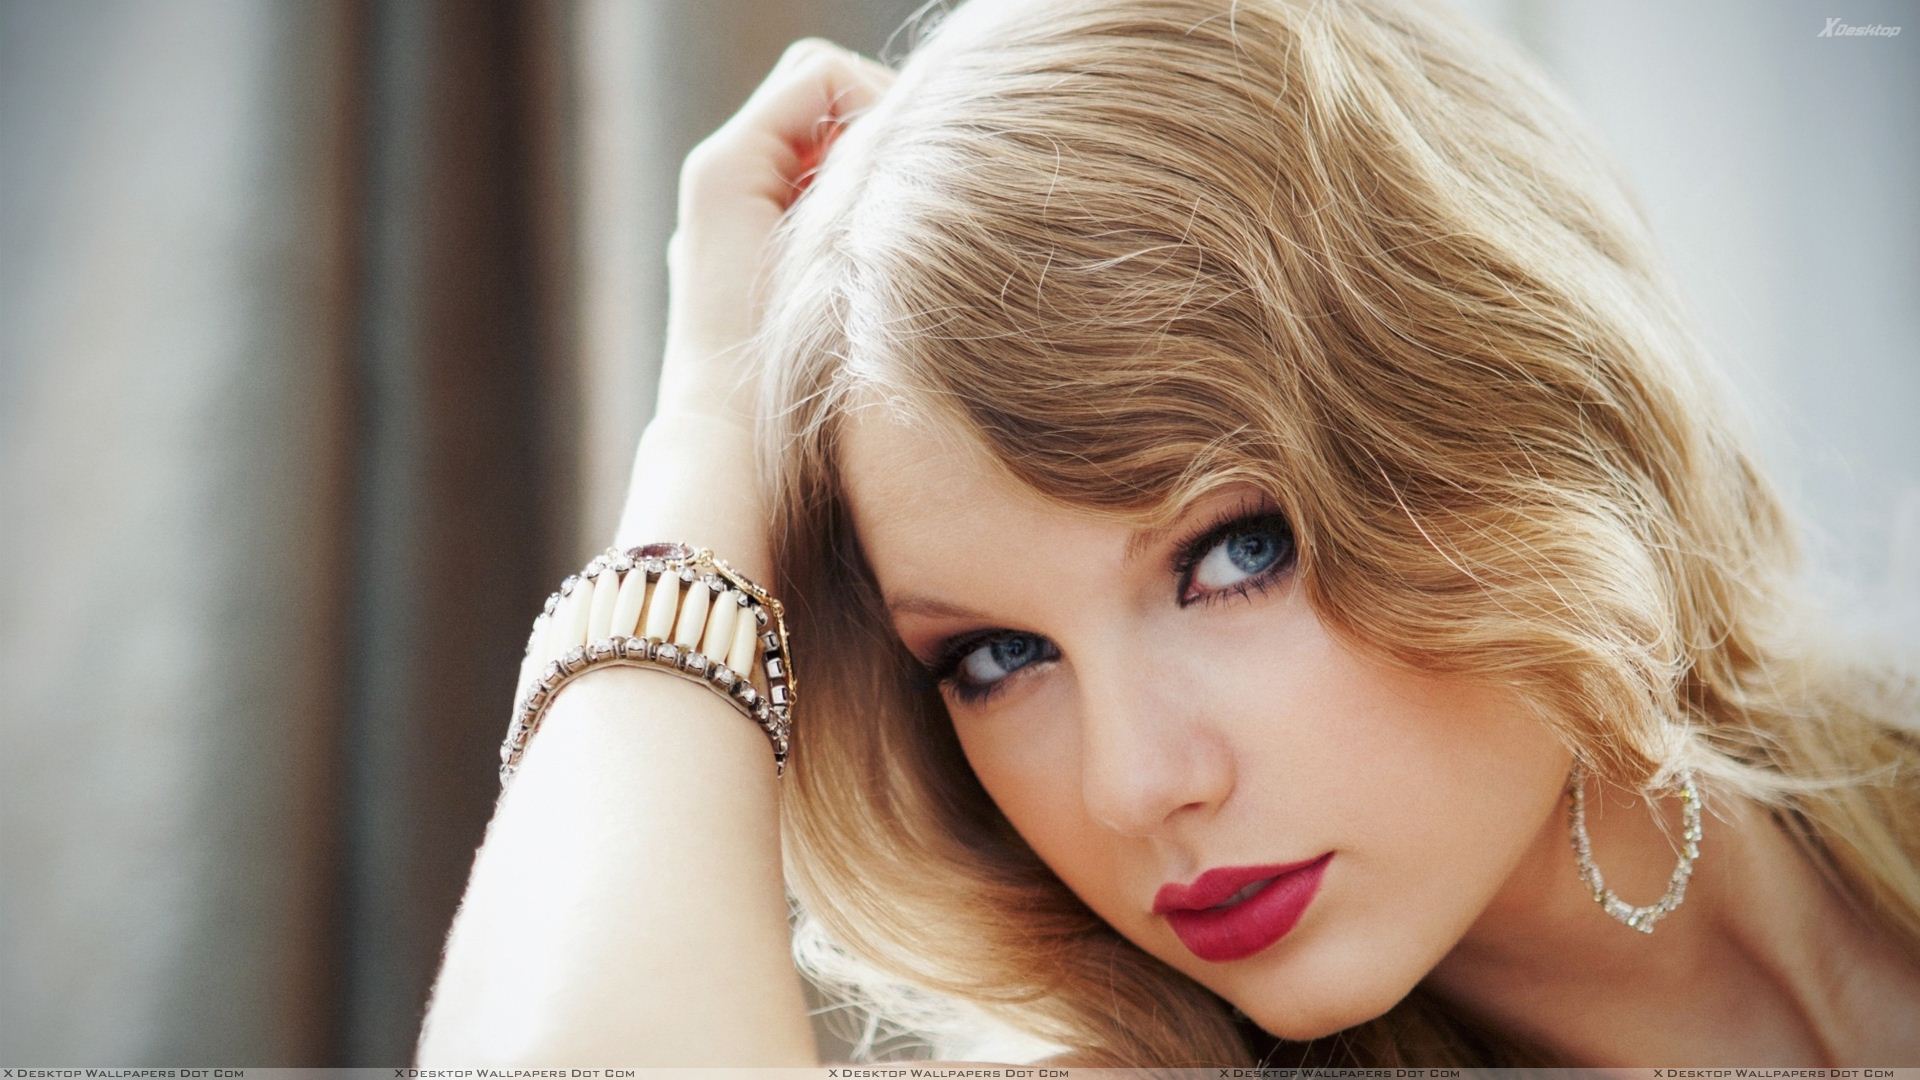 Beautiful Pictures Of Taylor Swift Hd - HD Wallpaper 